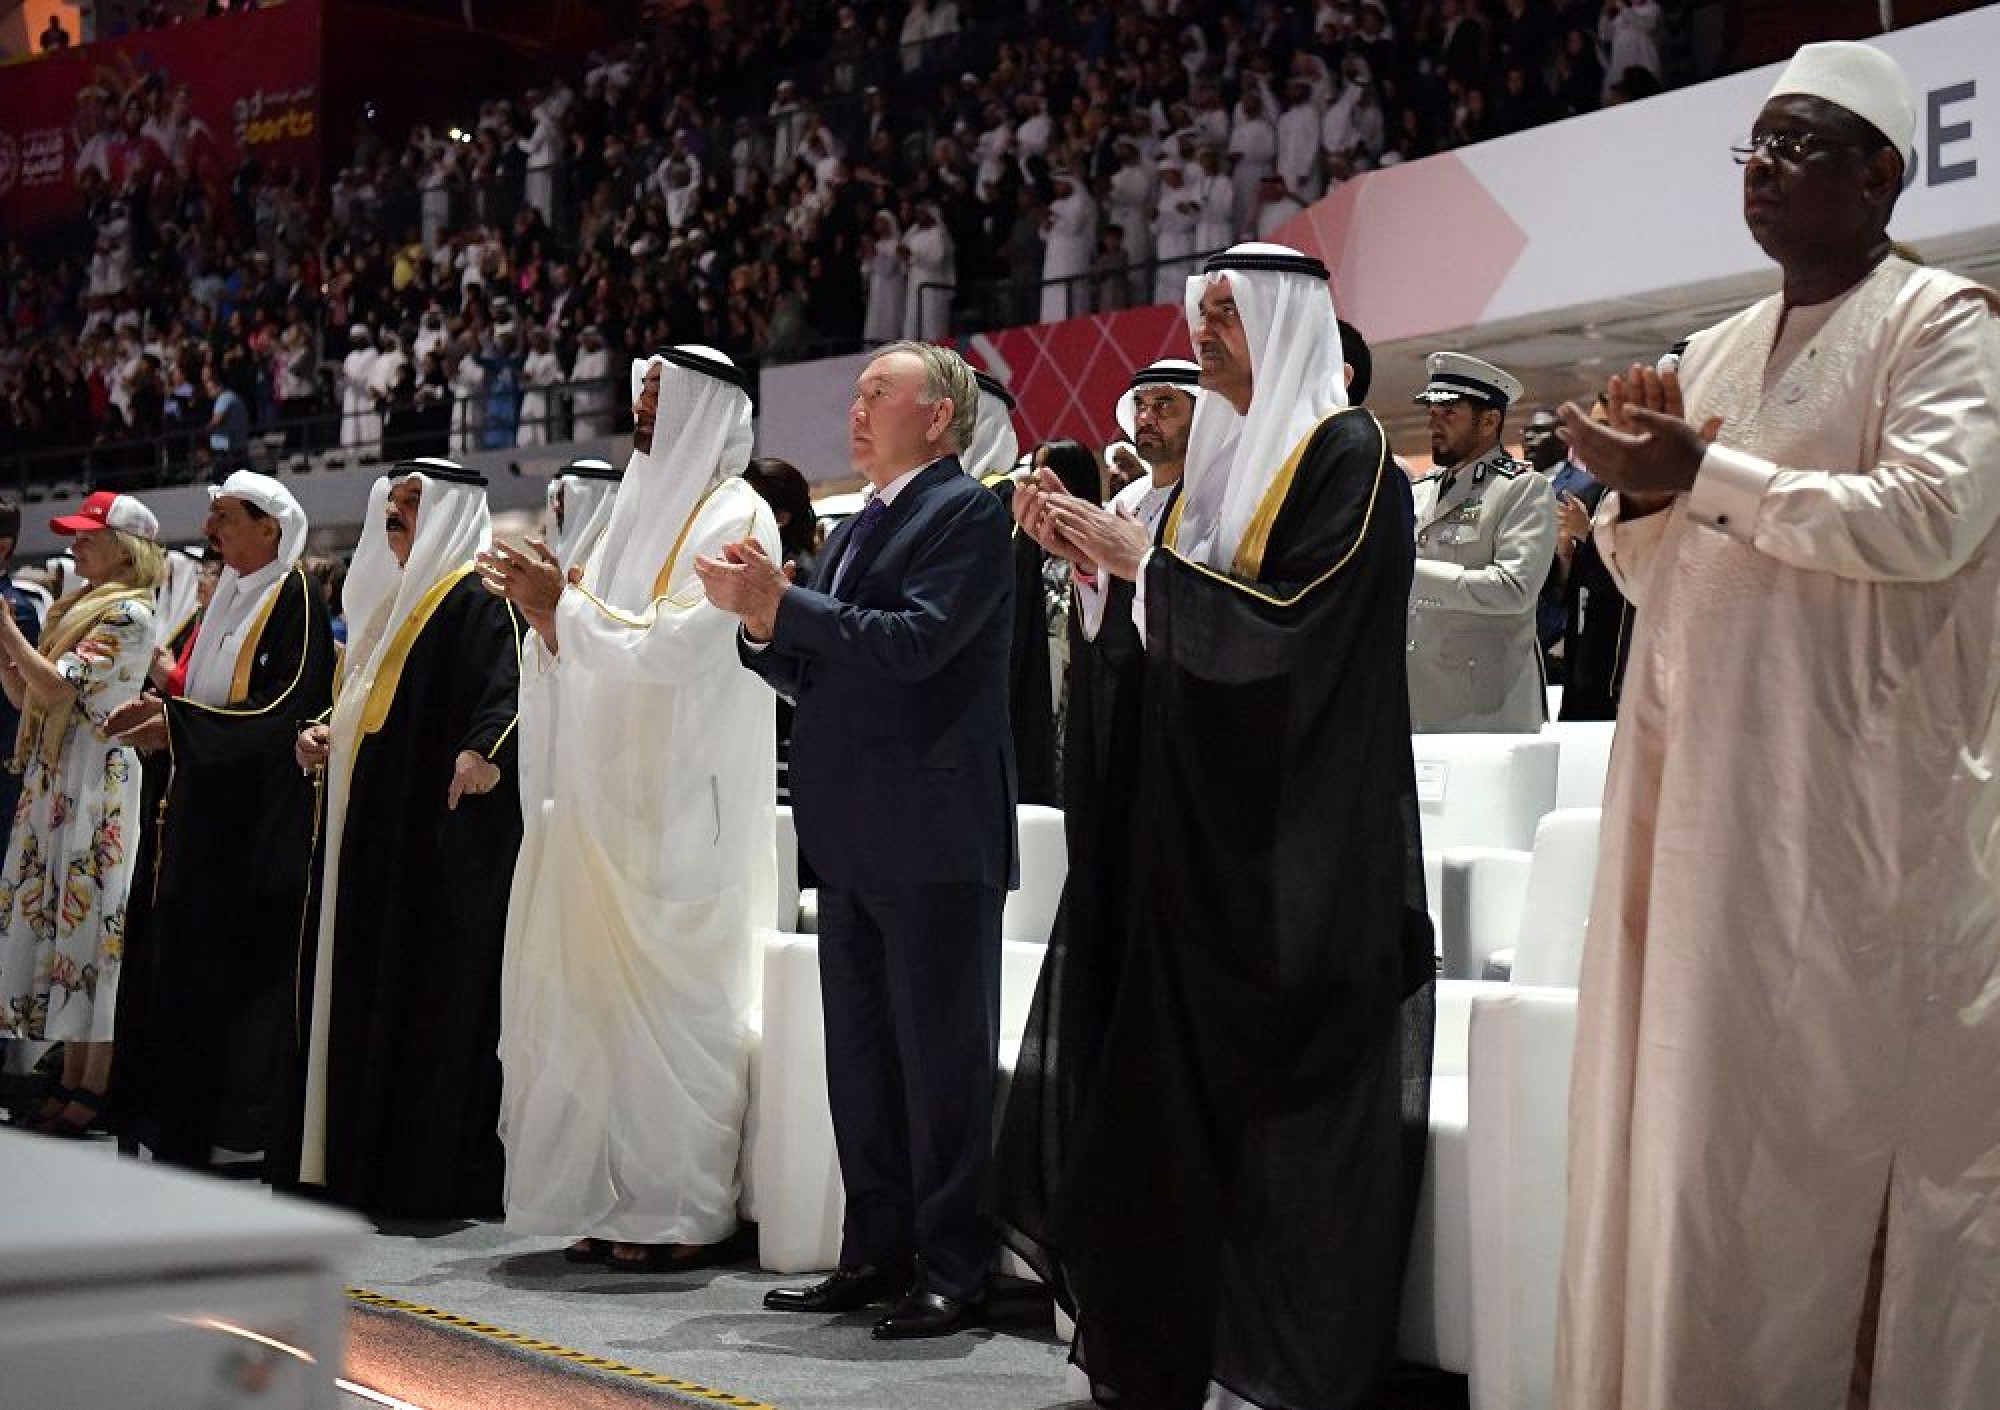 Kazakh President participates in the opening ceremony of the World Special Olympics